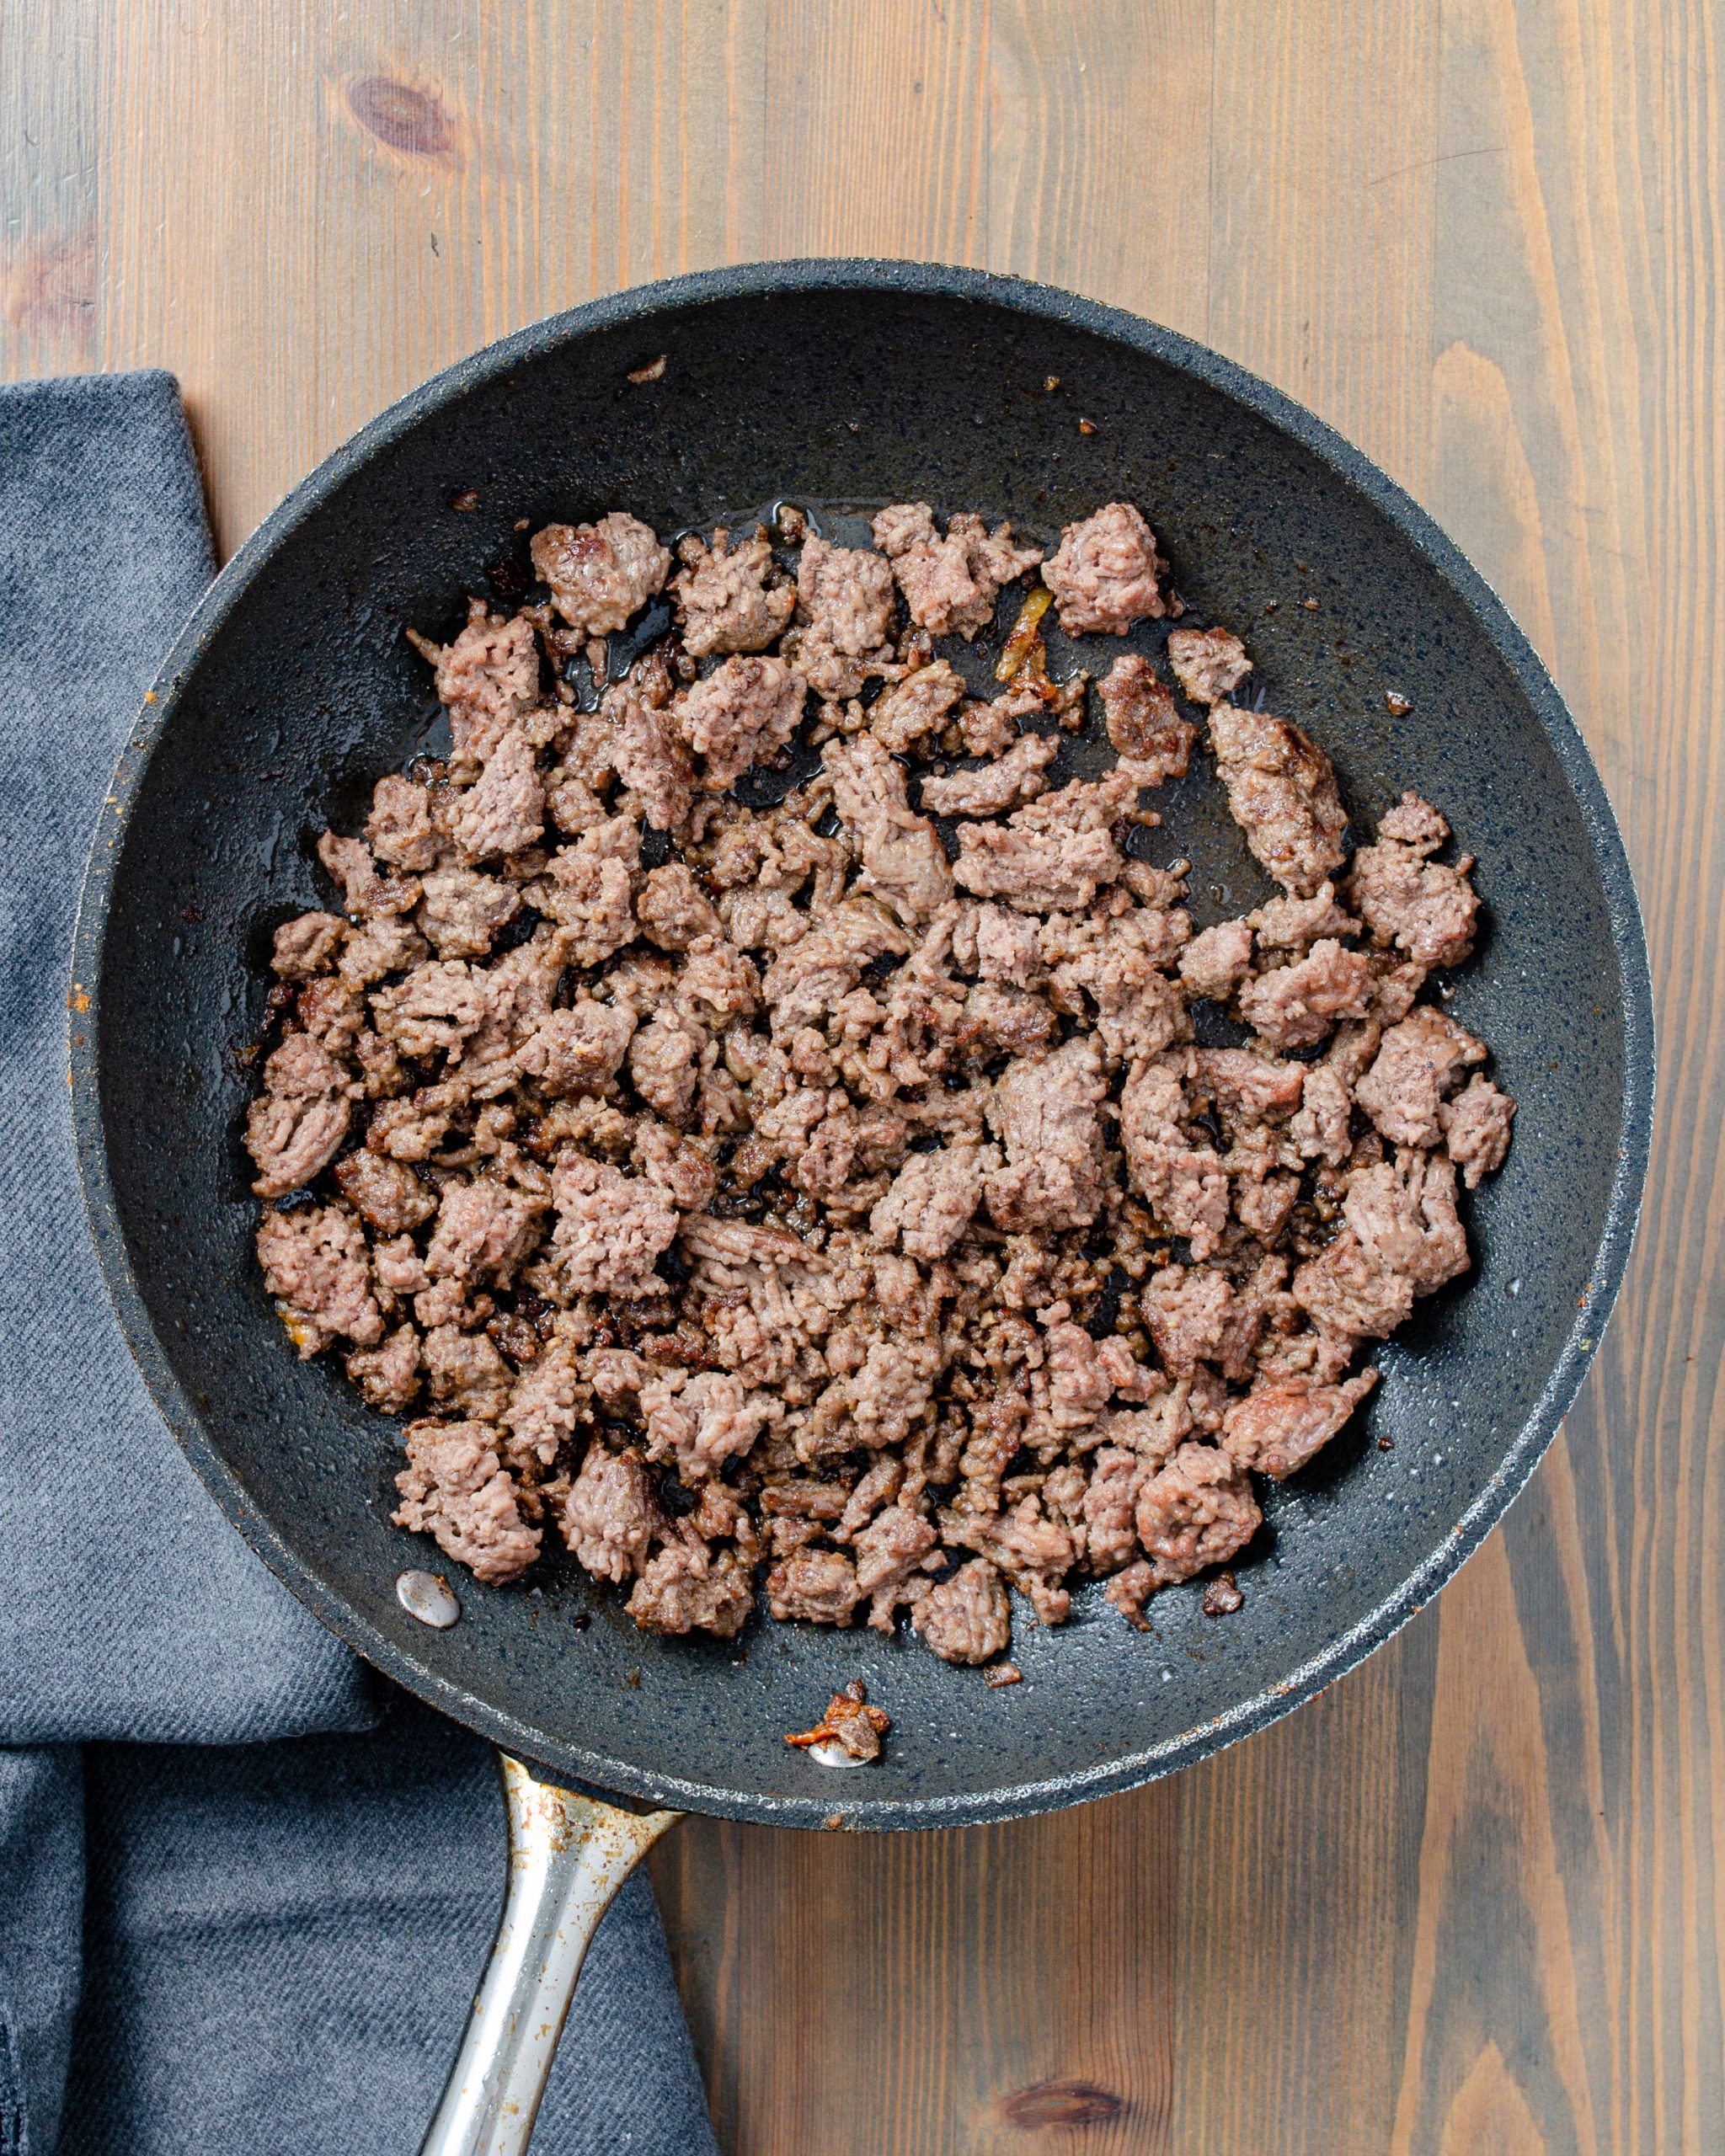 Add the ground beef to a skillet over medium-high heat on the stove and cook until browned completely. Drain any excess fat.